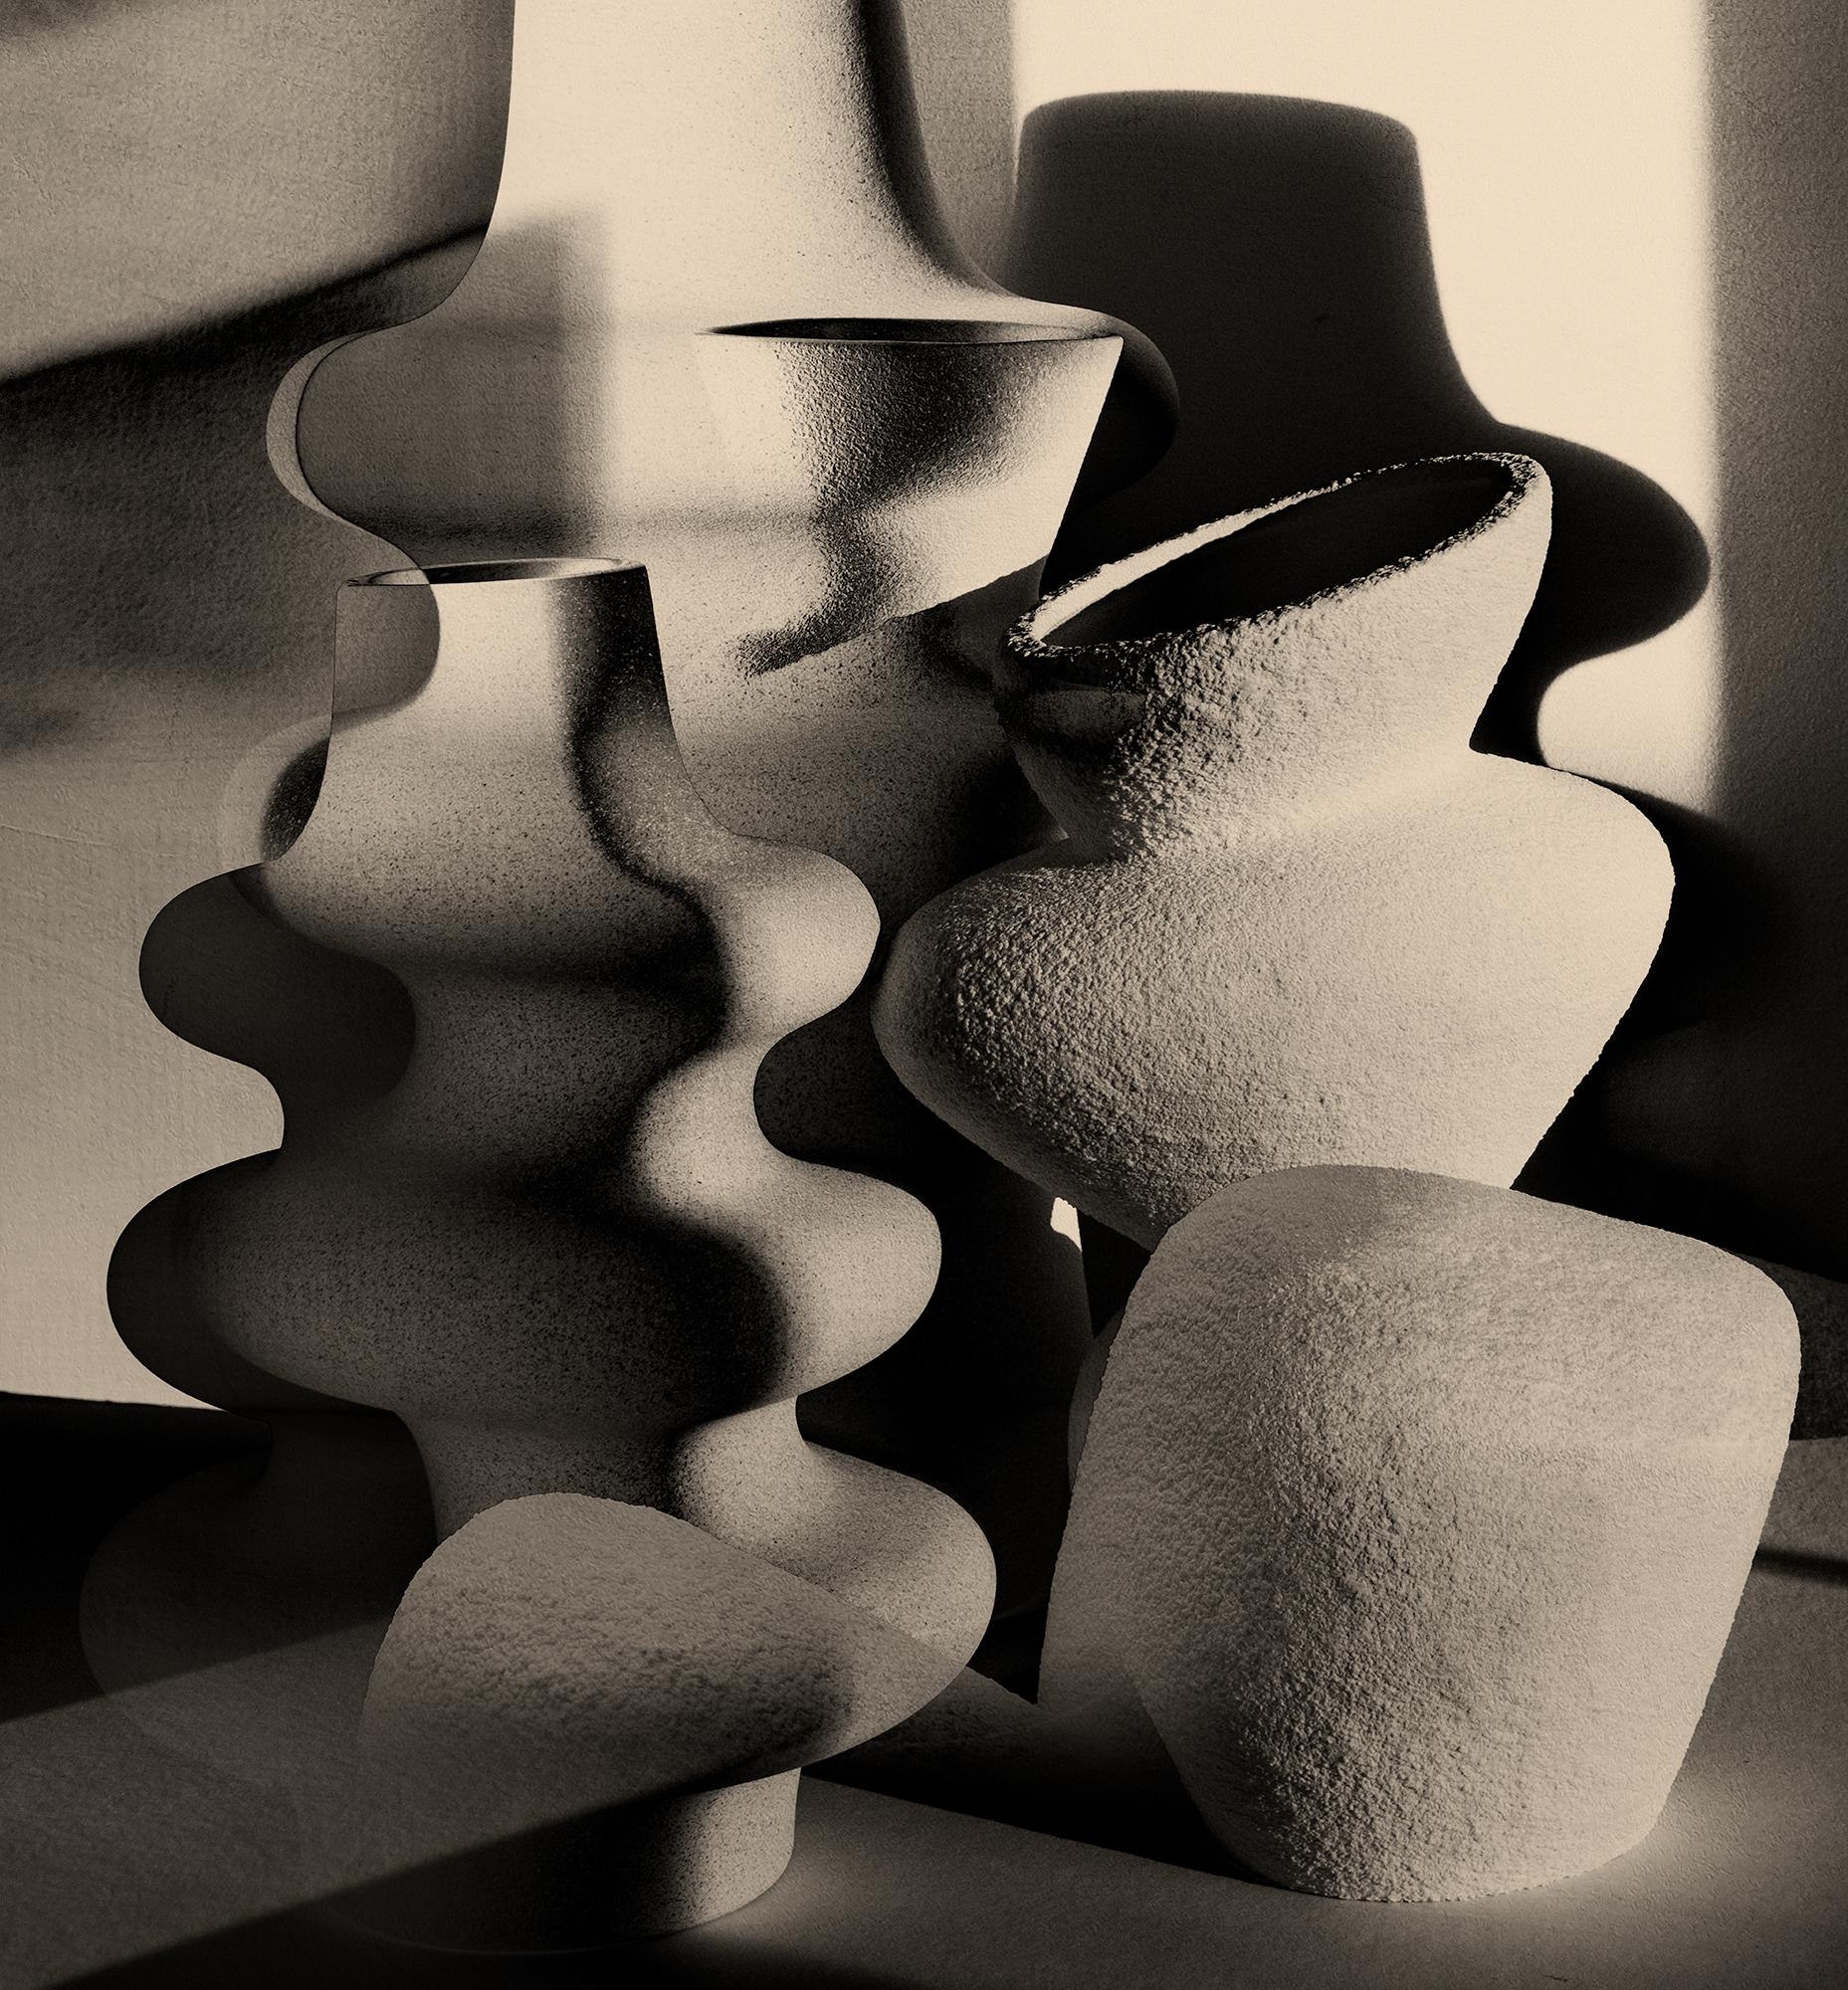 Sander Vos Abstract Photograph – In Between the Shadows #6, Sepia Farbdruck